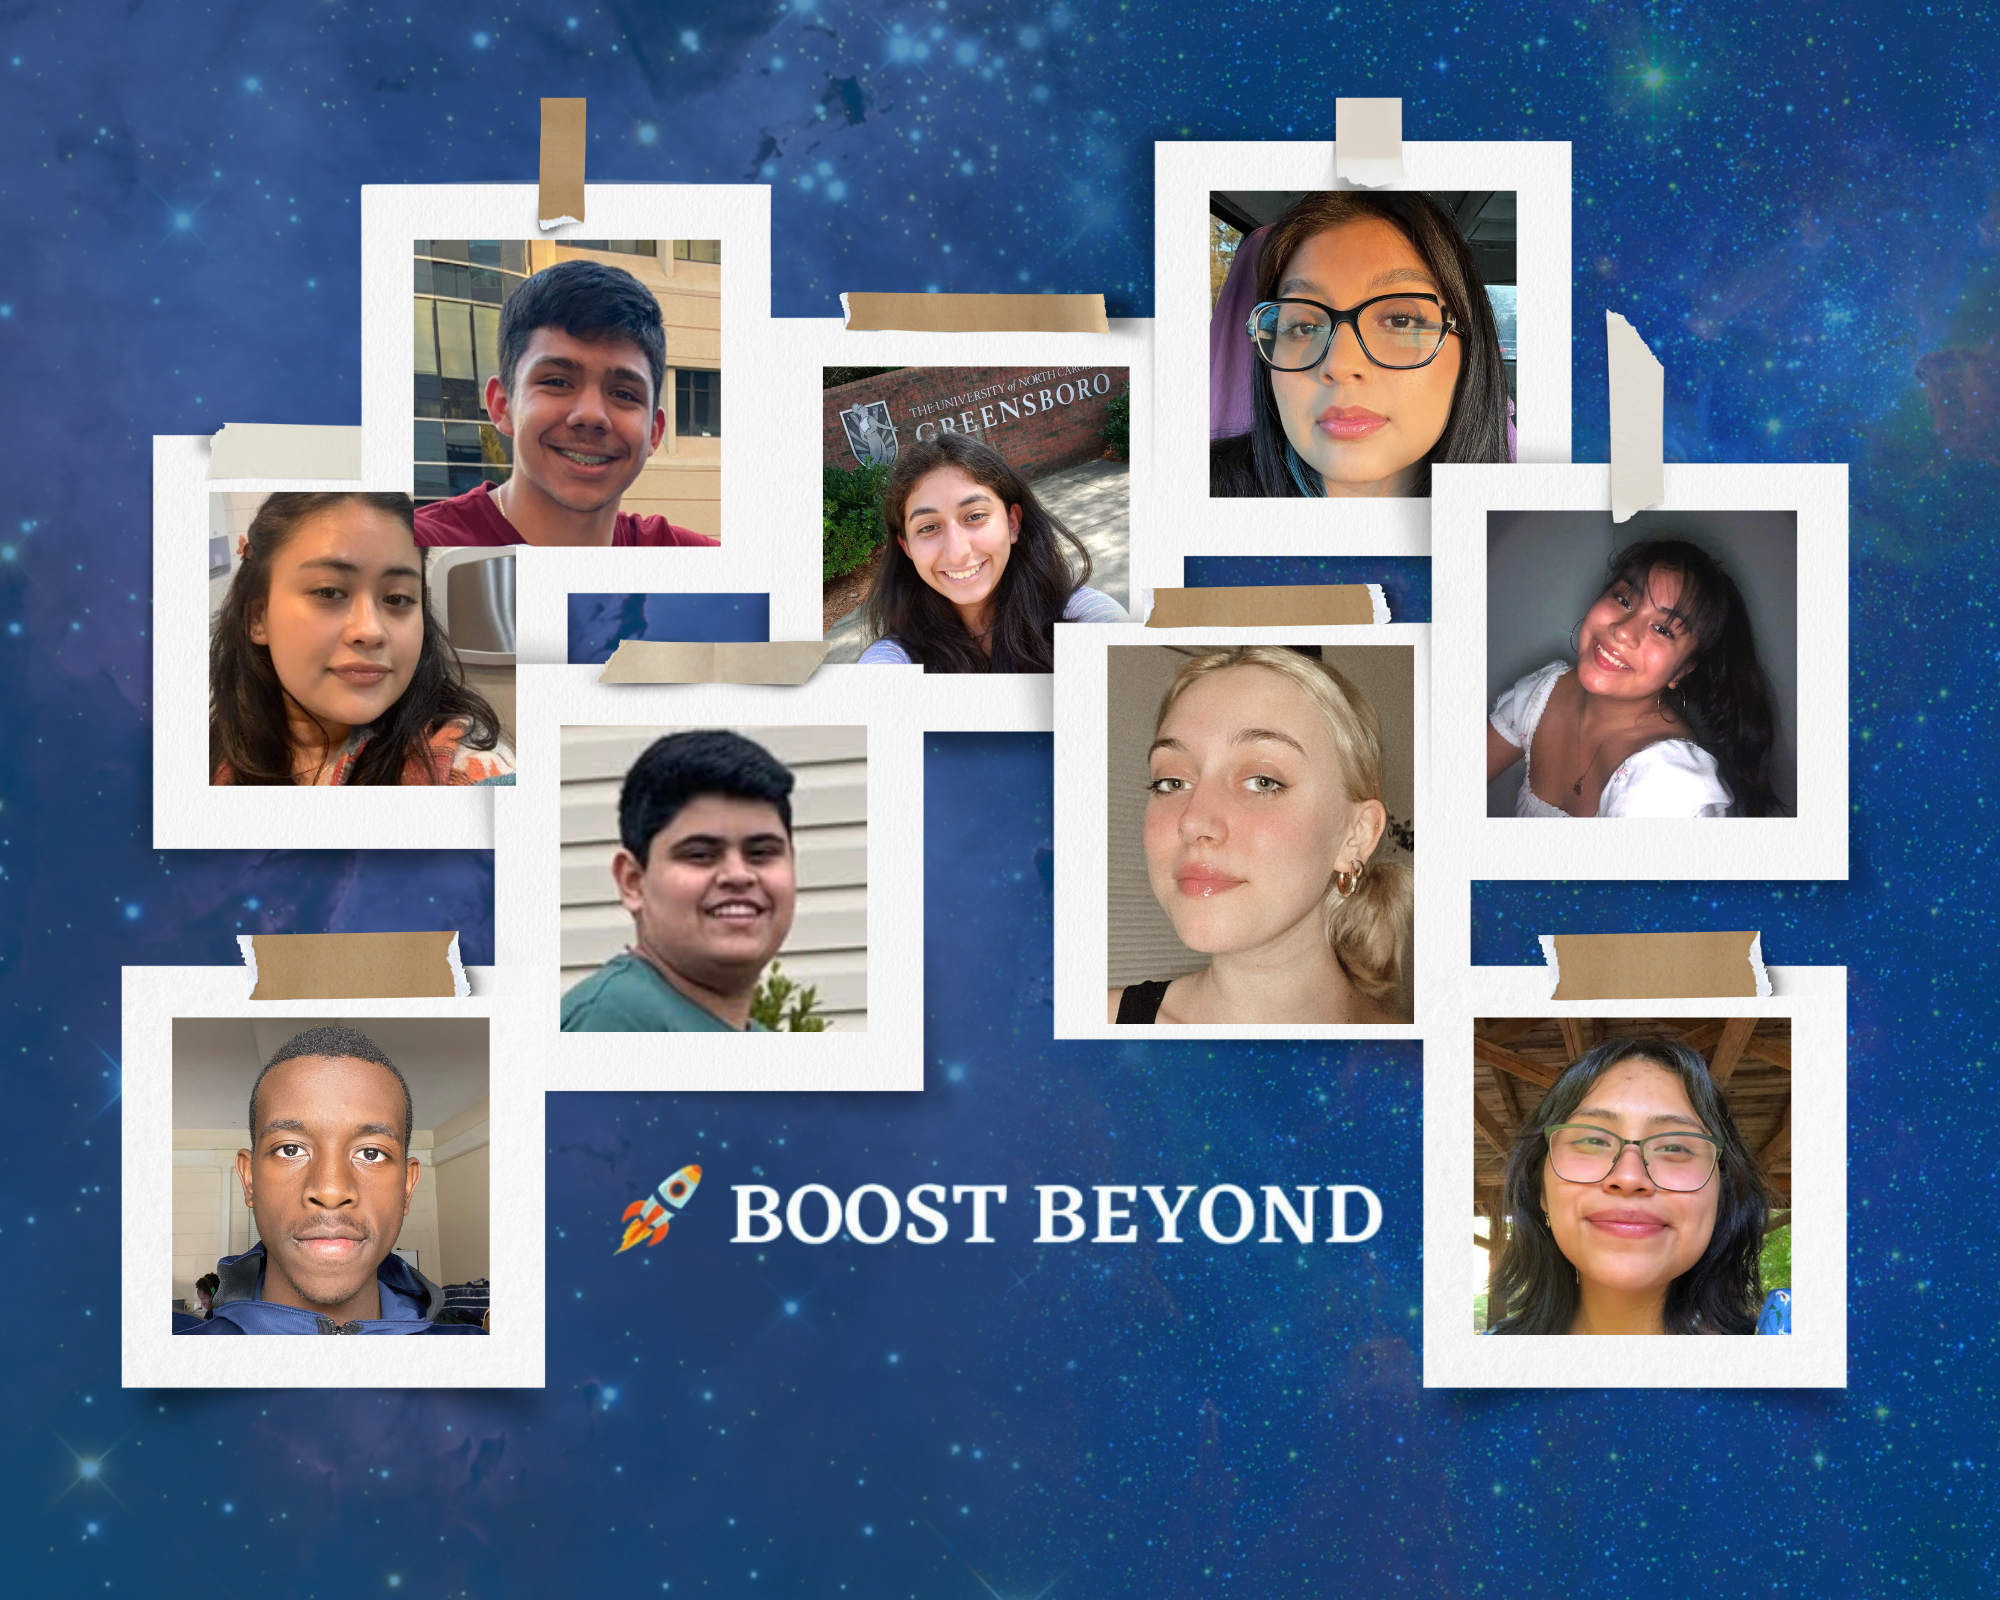 Collage featuring BOOST Beyond Mentees from year 1 of the program. The mentee photos are arranged around the BOOST Beyond logo, which is the name "BOOST Beyond" situated to the right of a rocket ship.